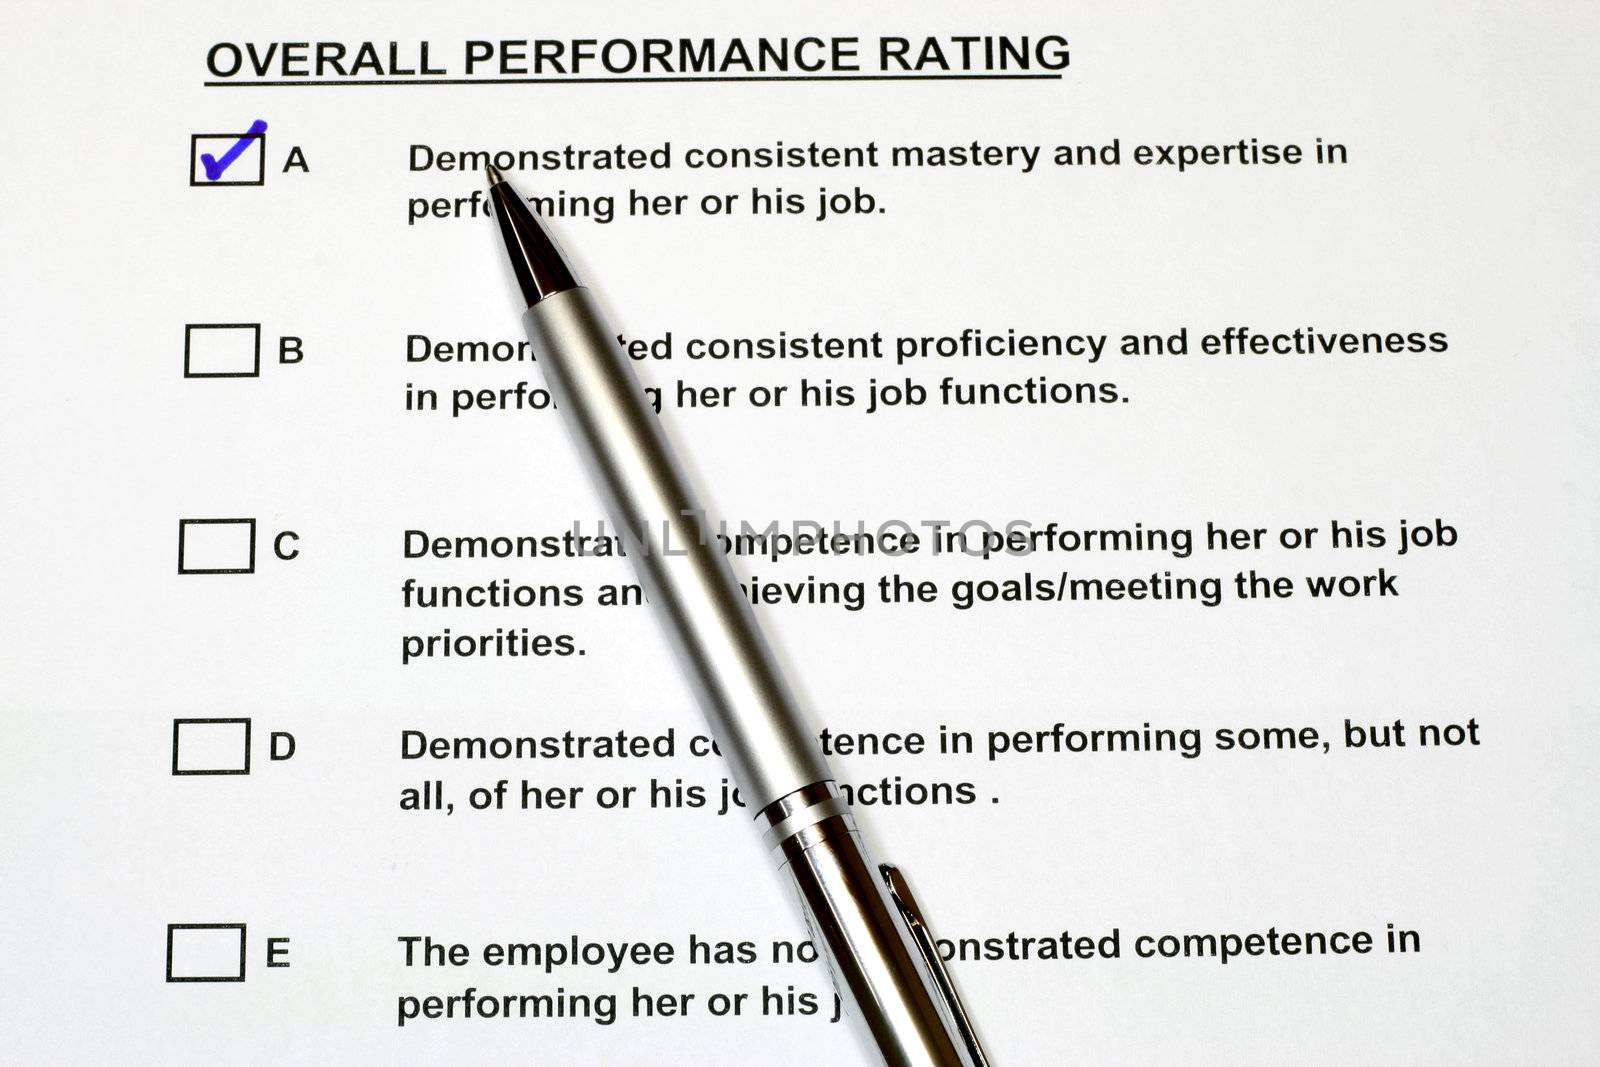 Overall Performance Rating Form 2 by sacatani